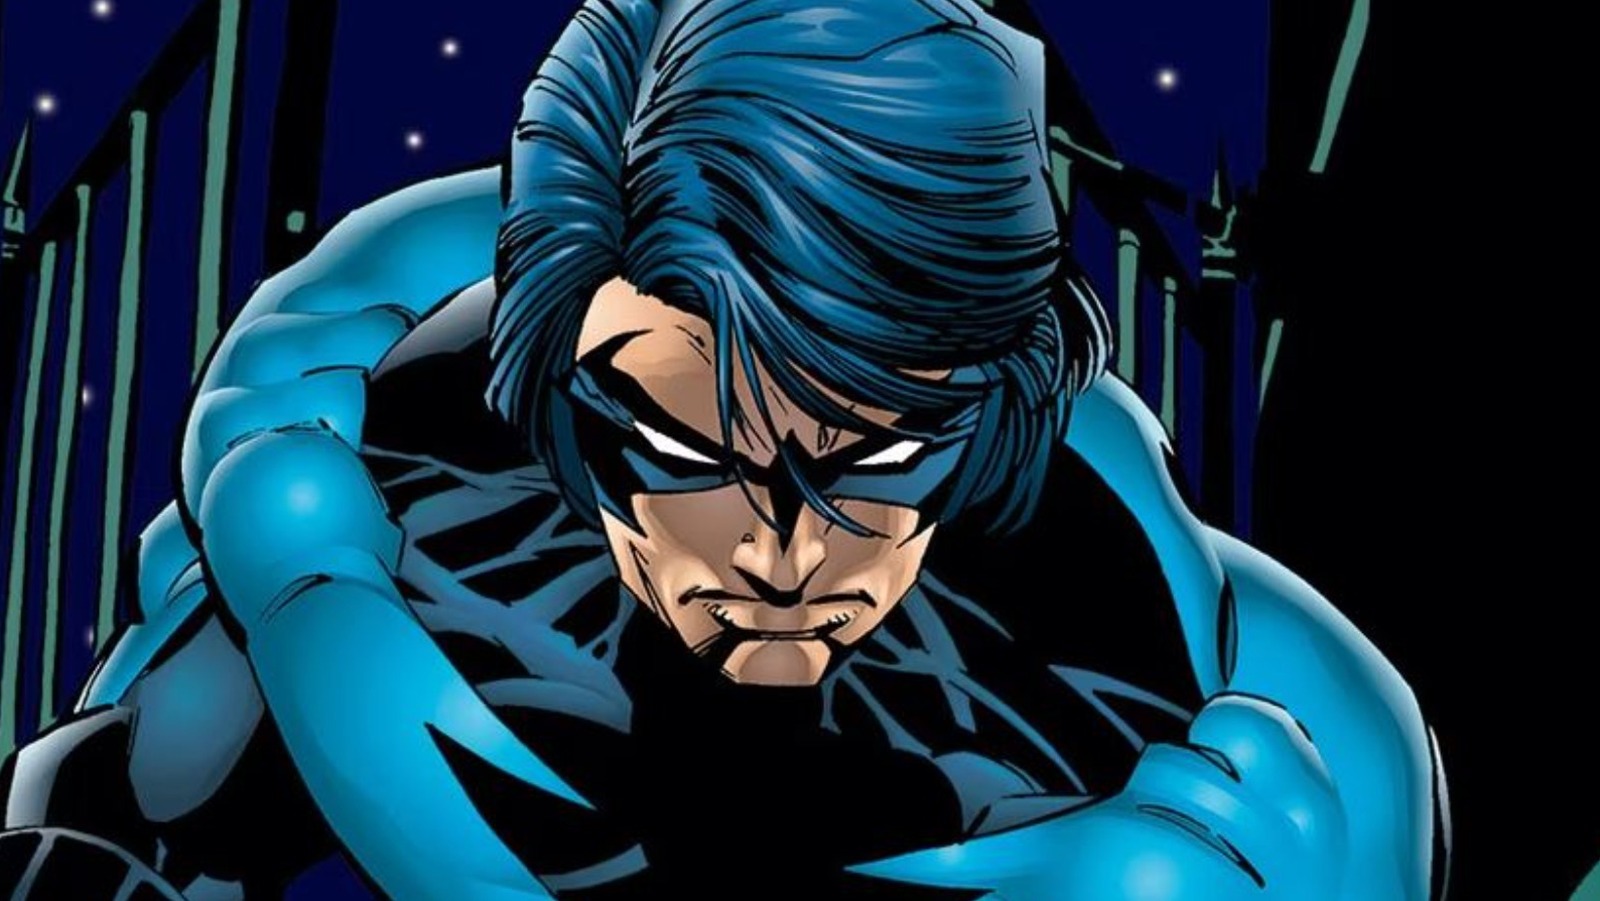 James Gunn's The Brave And The Bold Film For The DCU Will Likely Have  Nightwing Fans Upset